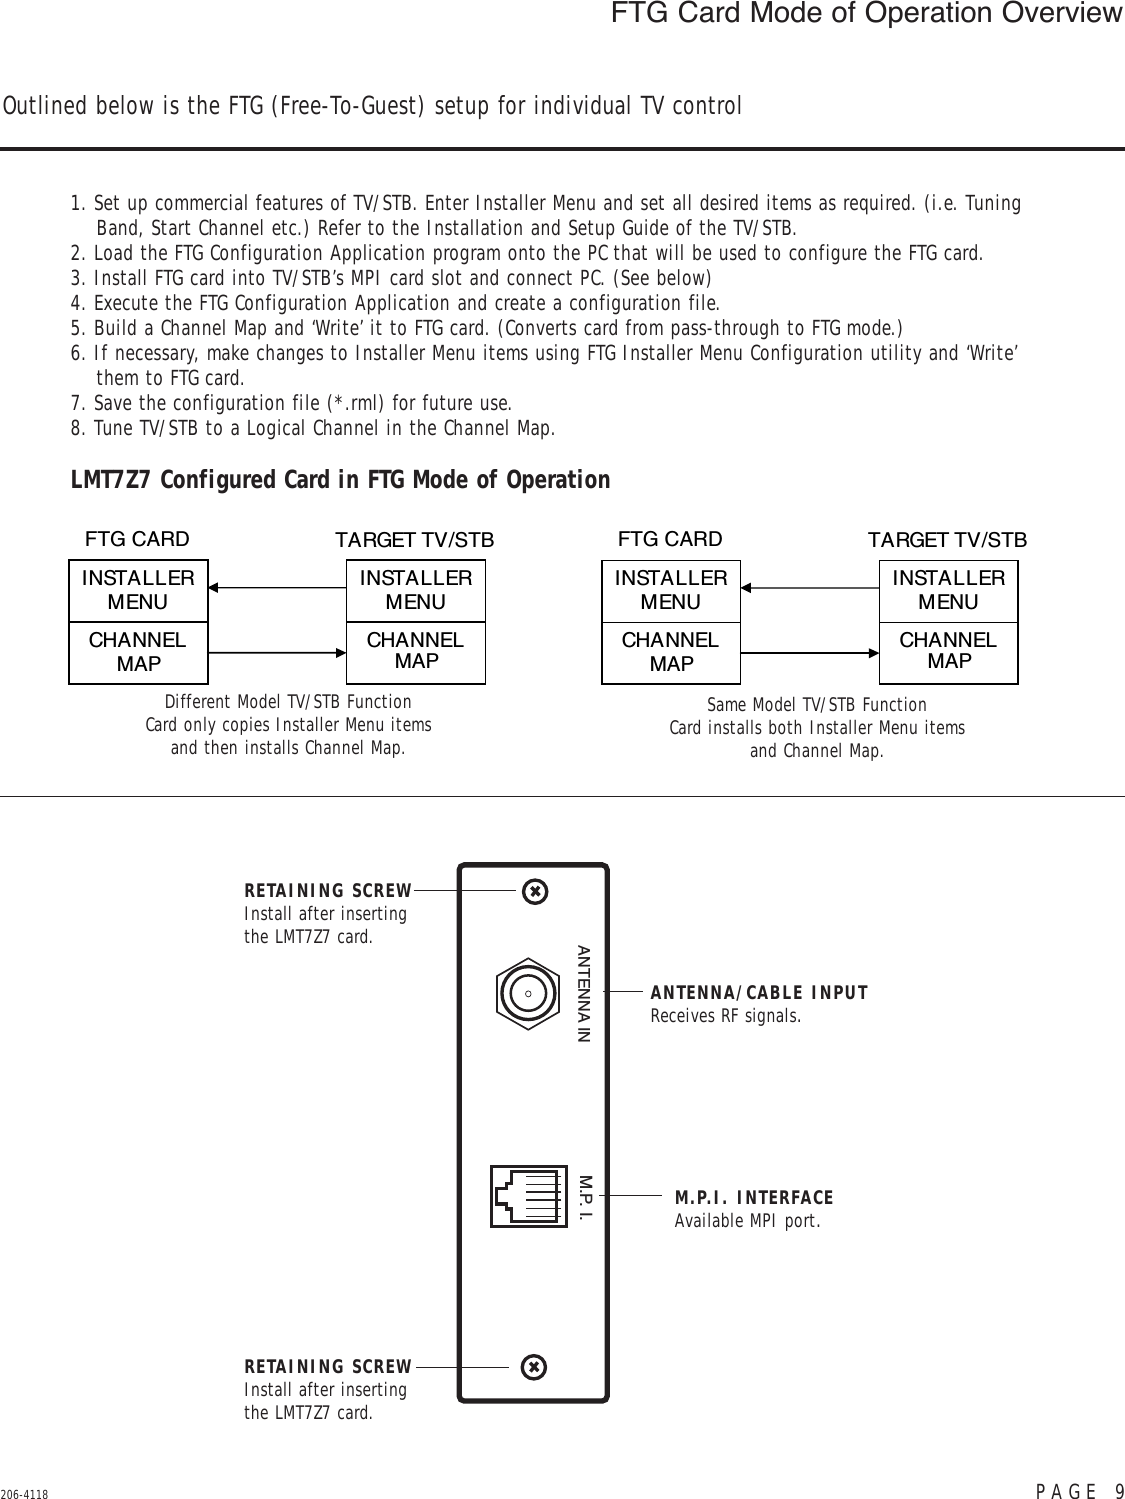 PAGE 9206-4118FTG Card Mode of Operation OverviewOutlined below is the FTG (Free-To-Guest) setup for individual TV controlANTENNA IN M.P. I.ANTENNA/CABLE INPUTReceives RF signals.RETAINING SCREWInstall after insertingthe LMT7Z7 card.RETAINING SCREWInstall after insertingthe LMT7Z7 card.M.P.I. INTERFACEAvailable MPI port.FTG CARD  TARGET TV/STB CHANNEL MAPINSTALLER MENU CHANNEL  INSTALLER MENU MAPFTG CARD  TARGET TV/STB CHANNEL MAPINSTALLER MENU CHANNEL  INSTALLER MENU MAP1. Set up commercial features of TV/STB. Enter Installer Menu and set all desired items as required. (i.e. TuningBand, Start Channel etc.) Refer to the Installation and Setup Guide of the TV/STB.2. Load the FTG Configuration Application program onto the PC that will be used to configure the FTG card.3. Install FTG card into TV/STB’s MPI card slot and connect PC. (See below)4. Execute the FTG Configuration Application and create a configuration file.5. Build a Channel Map and ‘Write’ it to FTG card. (Converts card from pass-through to FTG mode.)6. If necessary, make changes to Installer Menu items using FTG Installer Menu Configuration utility and ‘Write’them to FTG card.7. Save the configuration file (*.rml) for future use.8. Tune TV/STB to a Logical Channel in the Channel Map.LMT7Z7 Configured Card in FTG Mode of OperationDifferent Model TV/STB FunctionCard only copies Installer Menu itemsand then installs Channel Map.Same Model TV/STB FunctionCard installs both Installer Menu itemsand Channel Map.